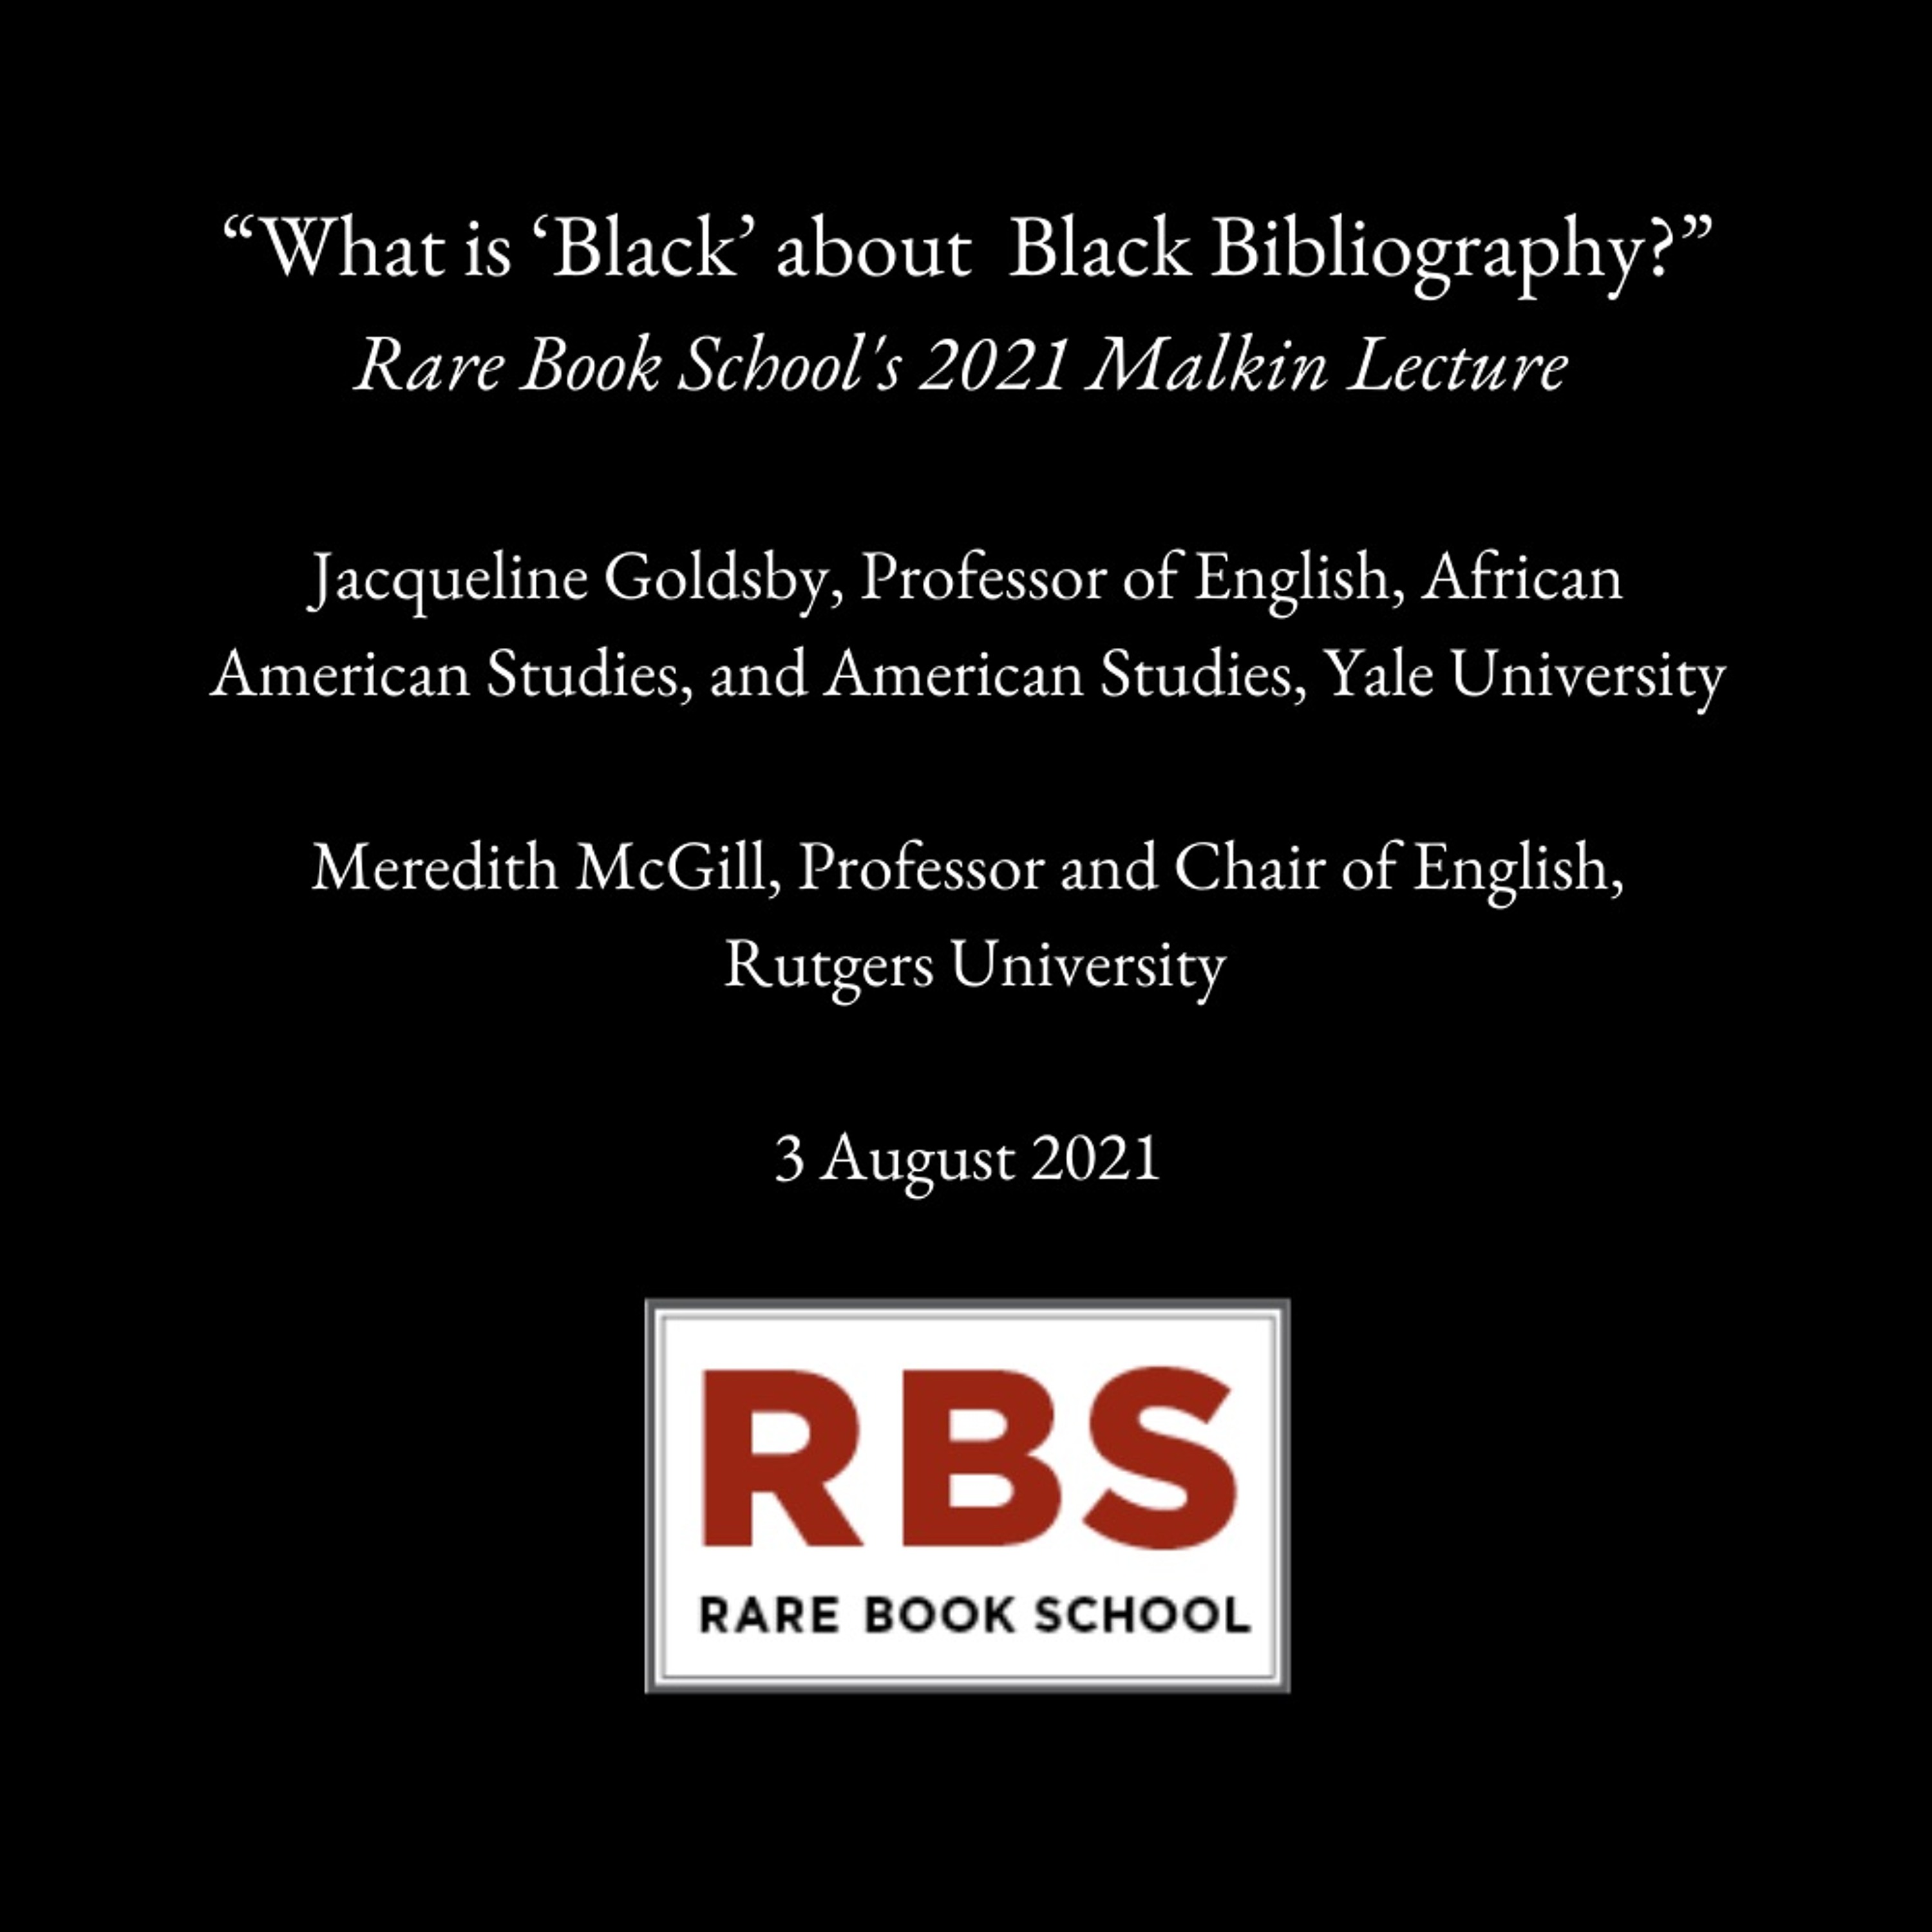 Goldsby and McGill - ”What is ’Black’ about Black Bibliography?” - 3 August 2021